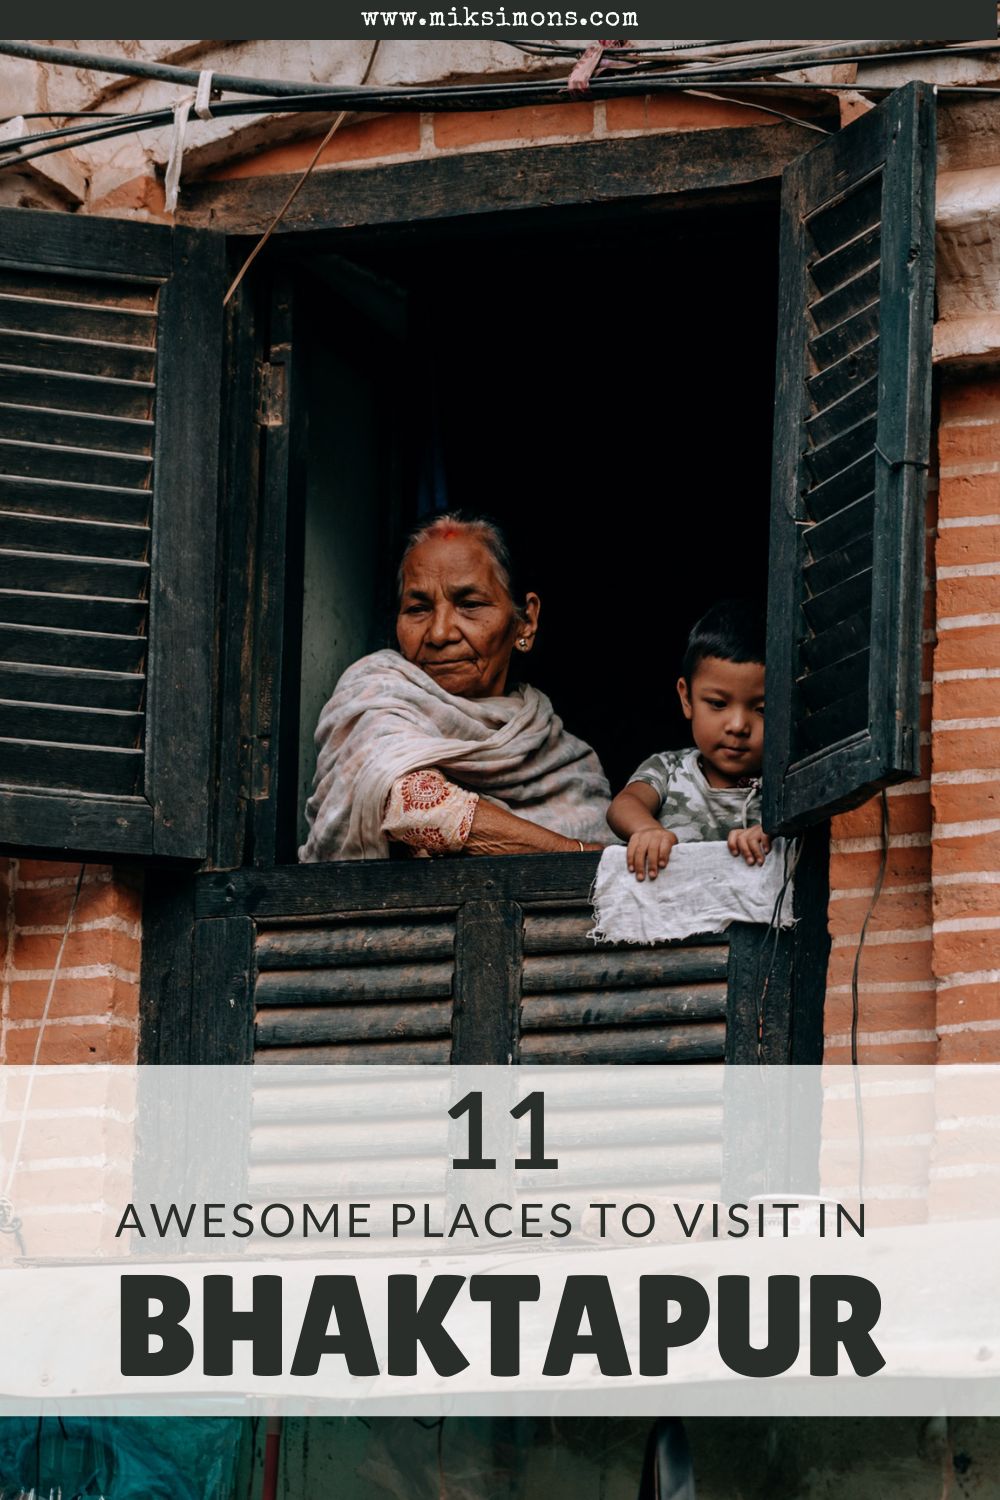 11 Awesome places to visit in Bhaktapur in Nepal3